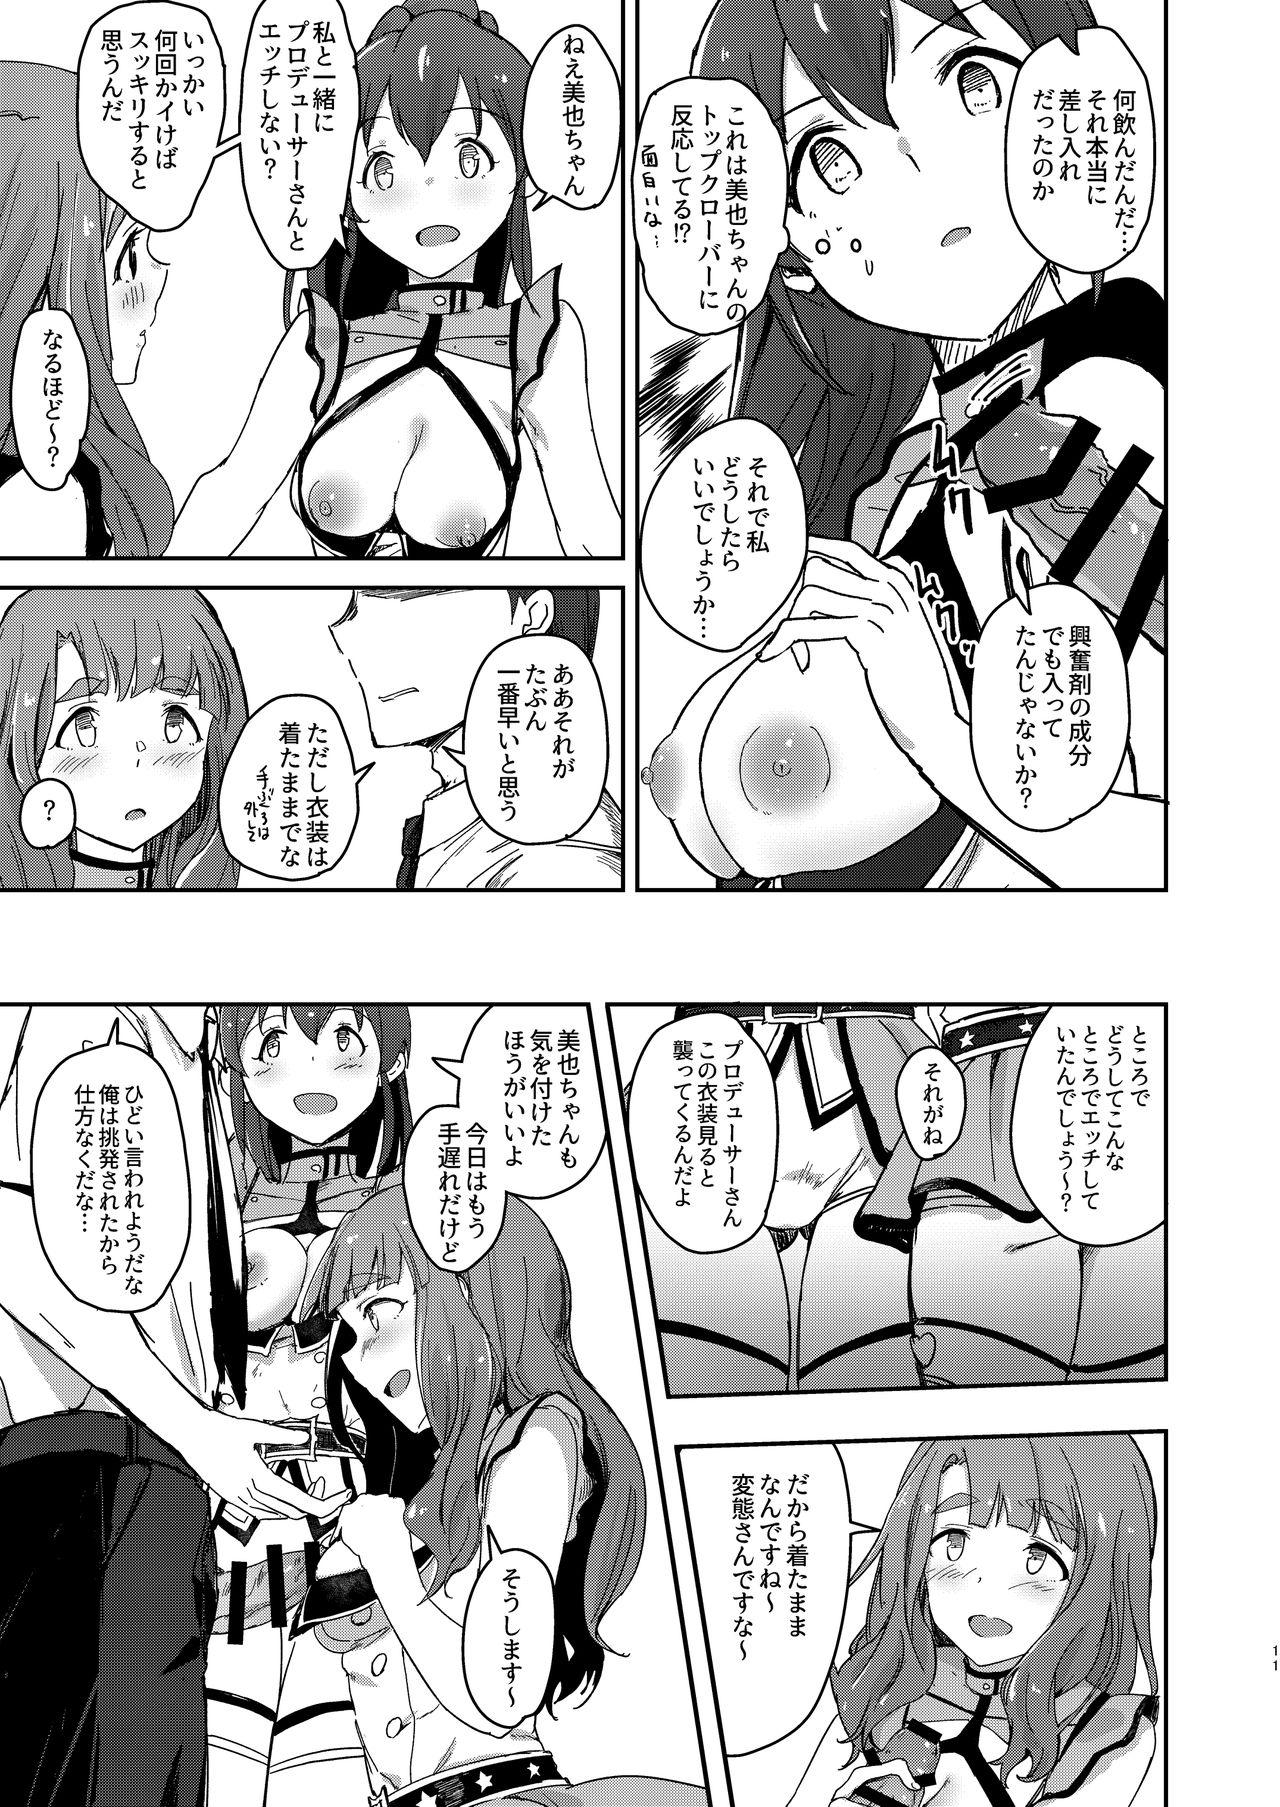 Girl TOP! CLOVER BOOK + omake - The idolmaster Cbt - Page 10